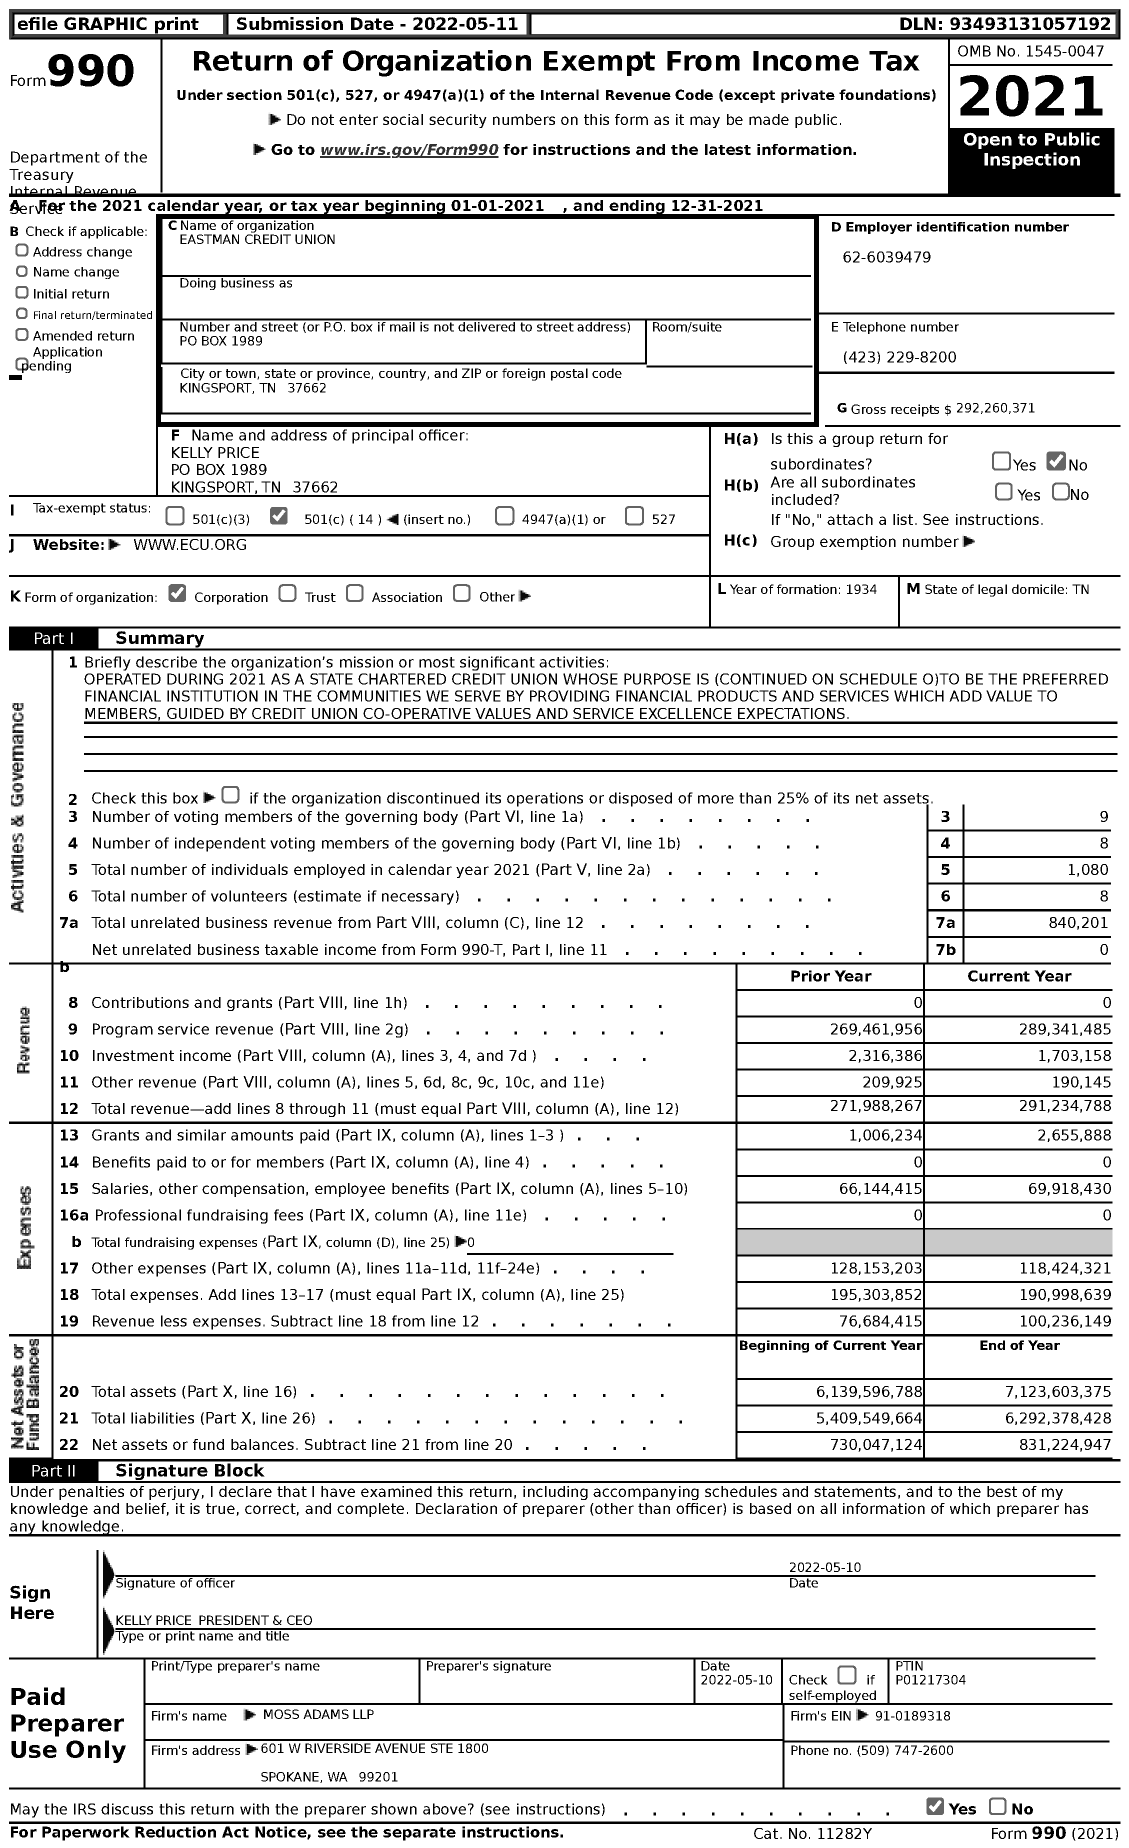 Image of first page of 2021 Form 990 for Eastman Credit Union (ECU)